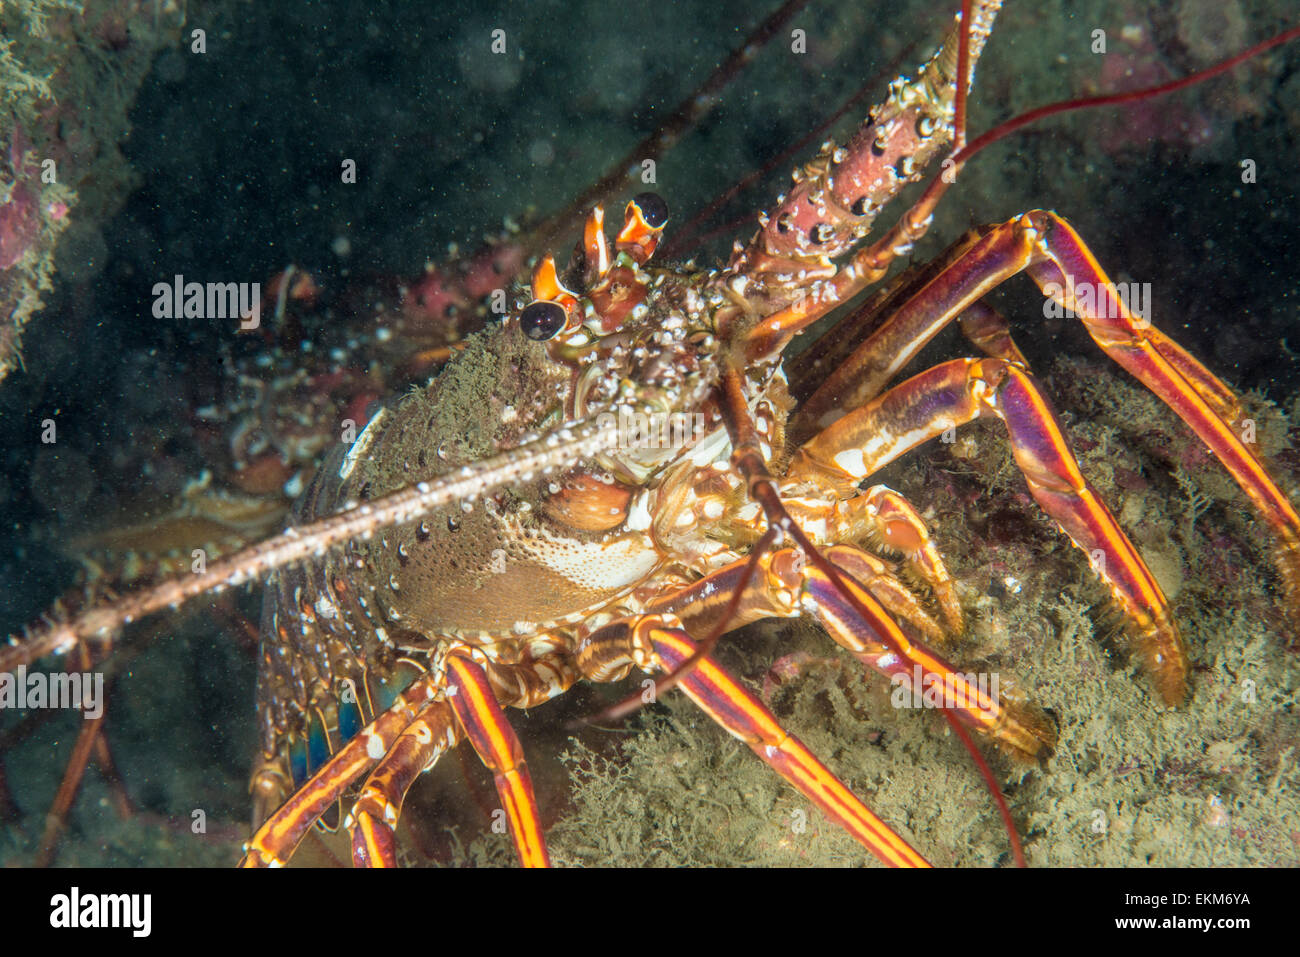 Japanese spiny lobster ( Panulirus japonicus ). at Owse, Mie, Japan. Stock Photo